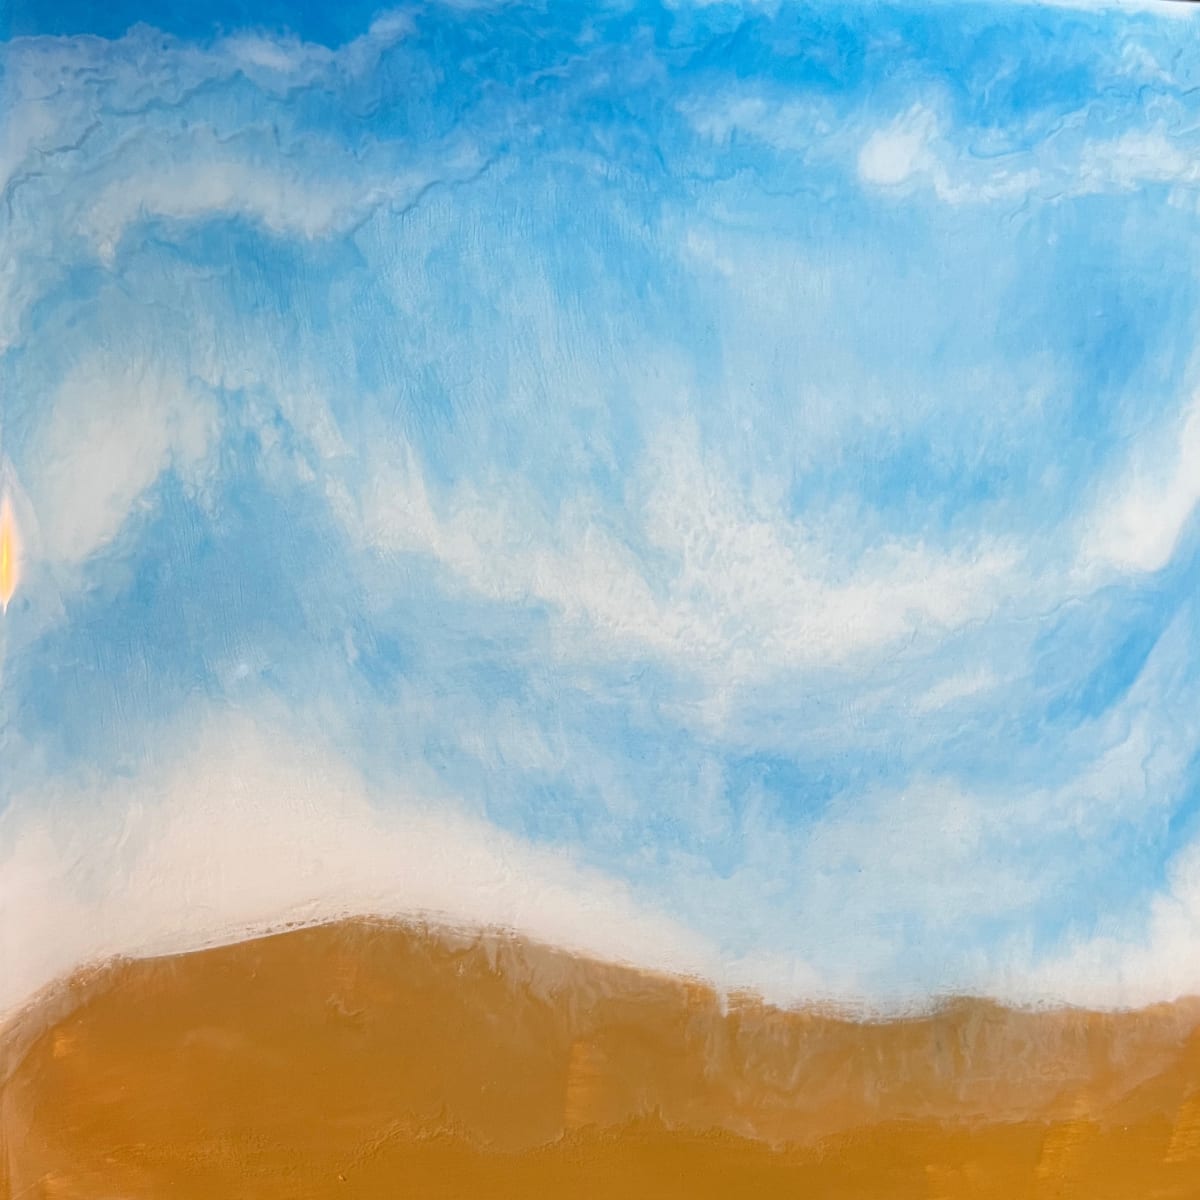 Unexpected Series - #7 by Kathie Collinson  Image: A View to the Water - acrylic paint with colored resin